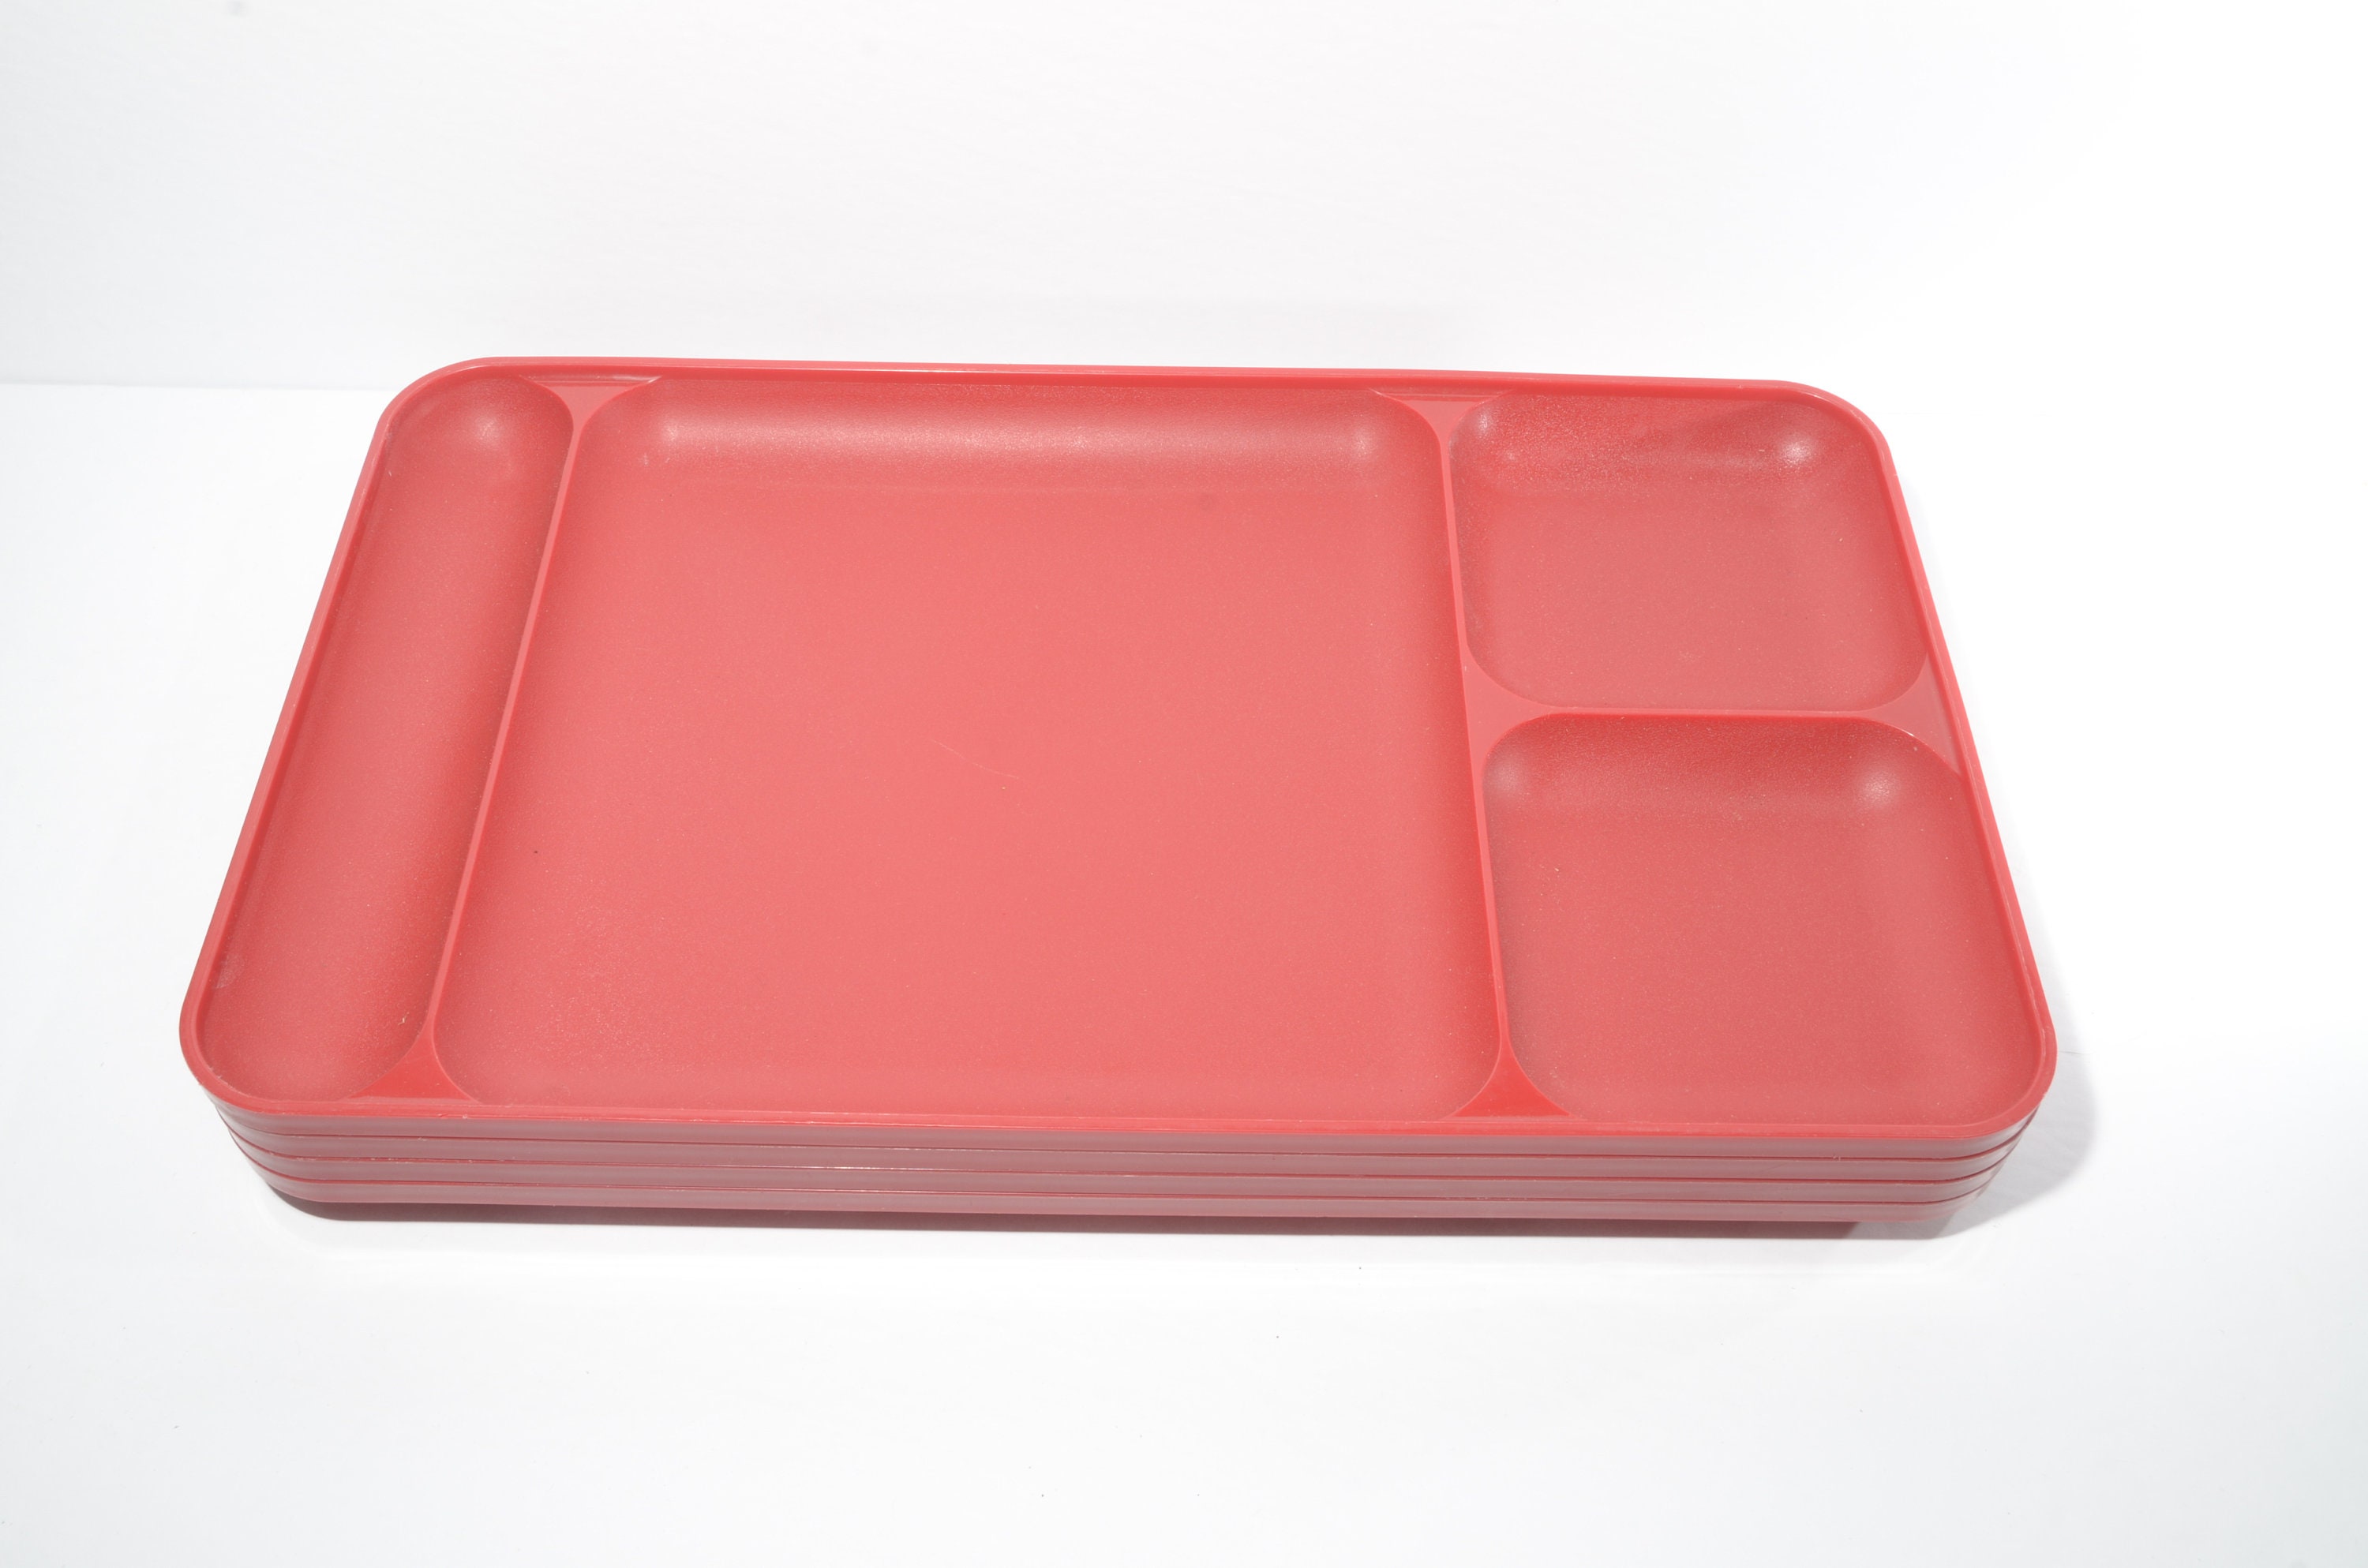 4 Vintage Tupperware Divided Tray Plate Picnic Cafeteria Style